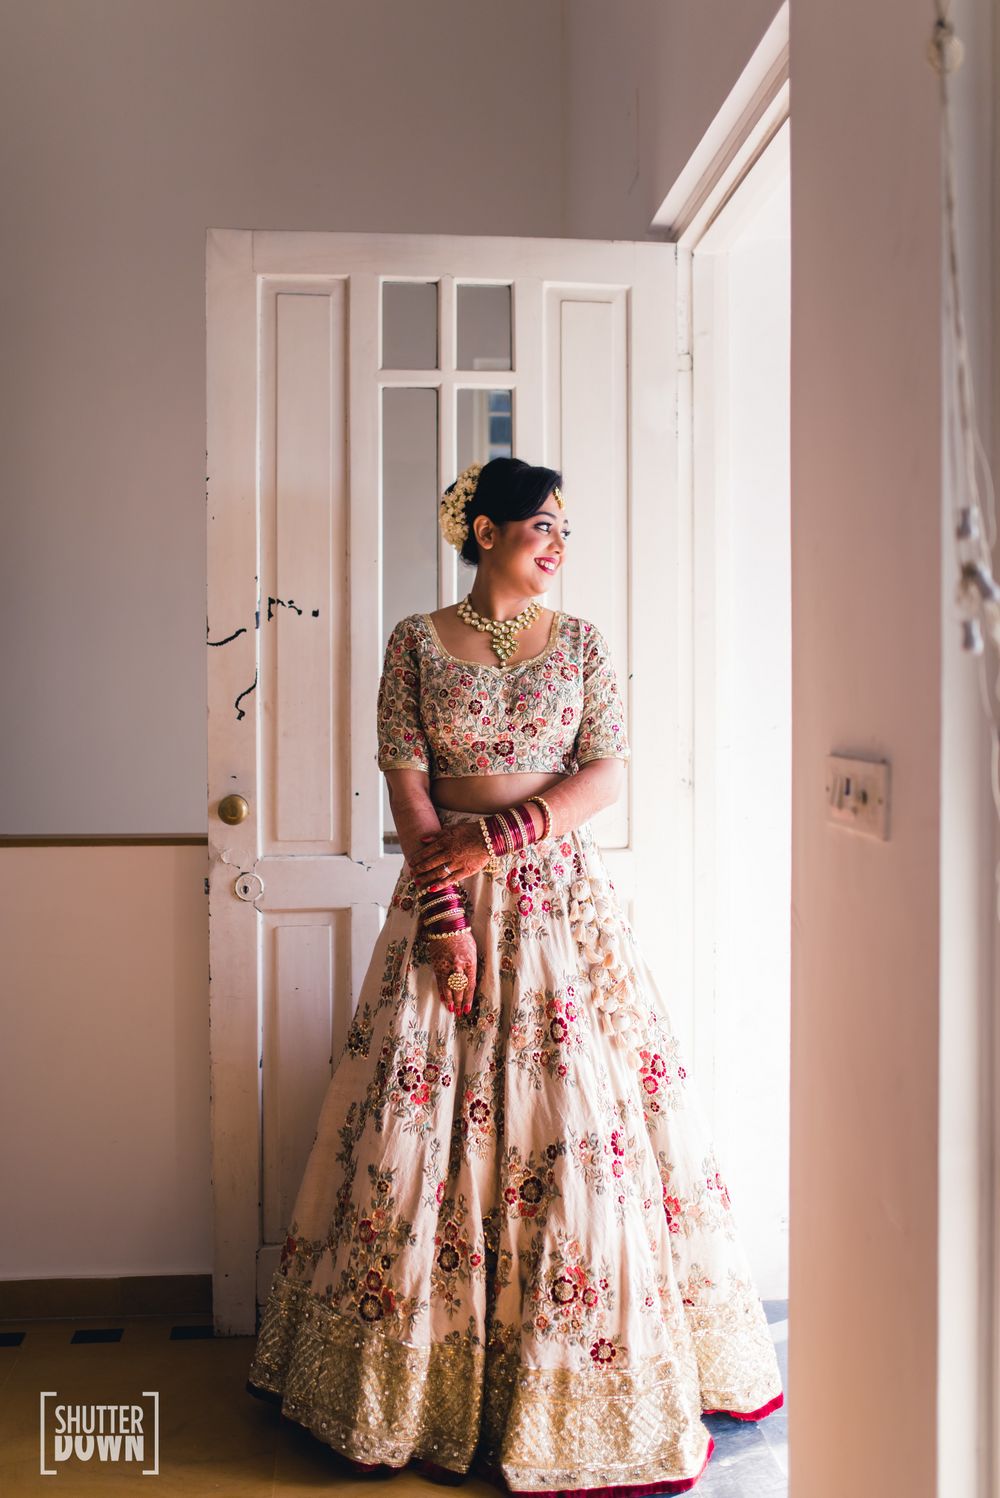 Photo of Offwhite and red lehenga with floral embroidery